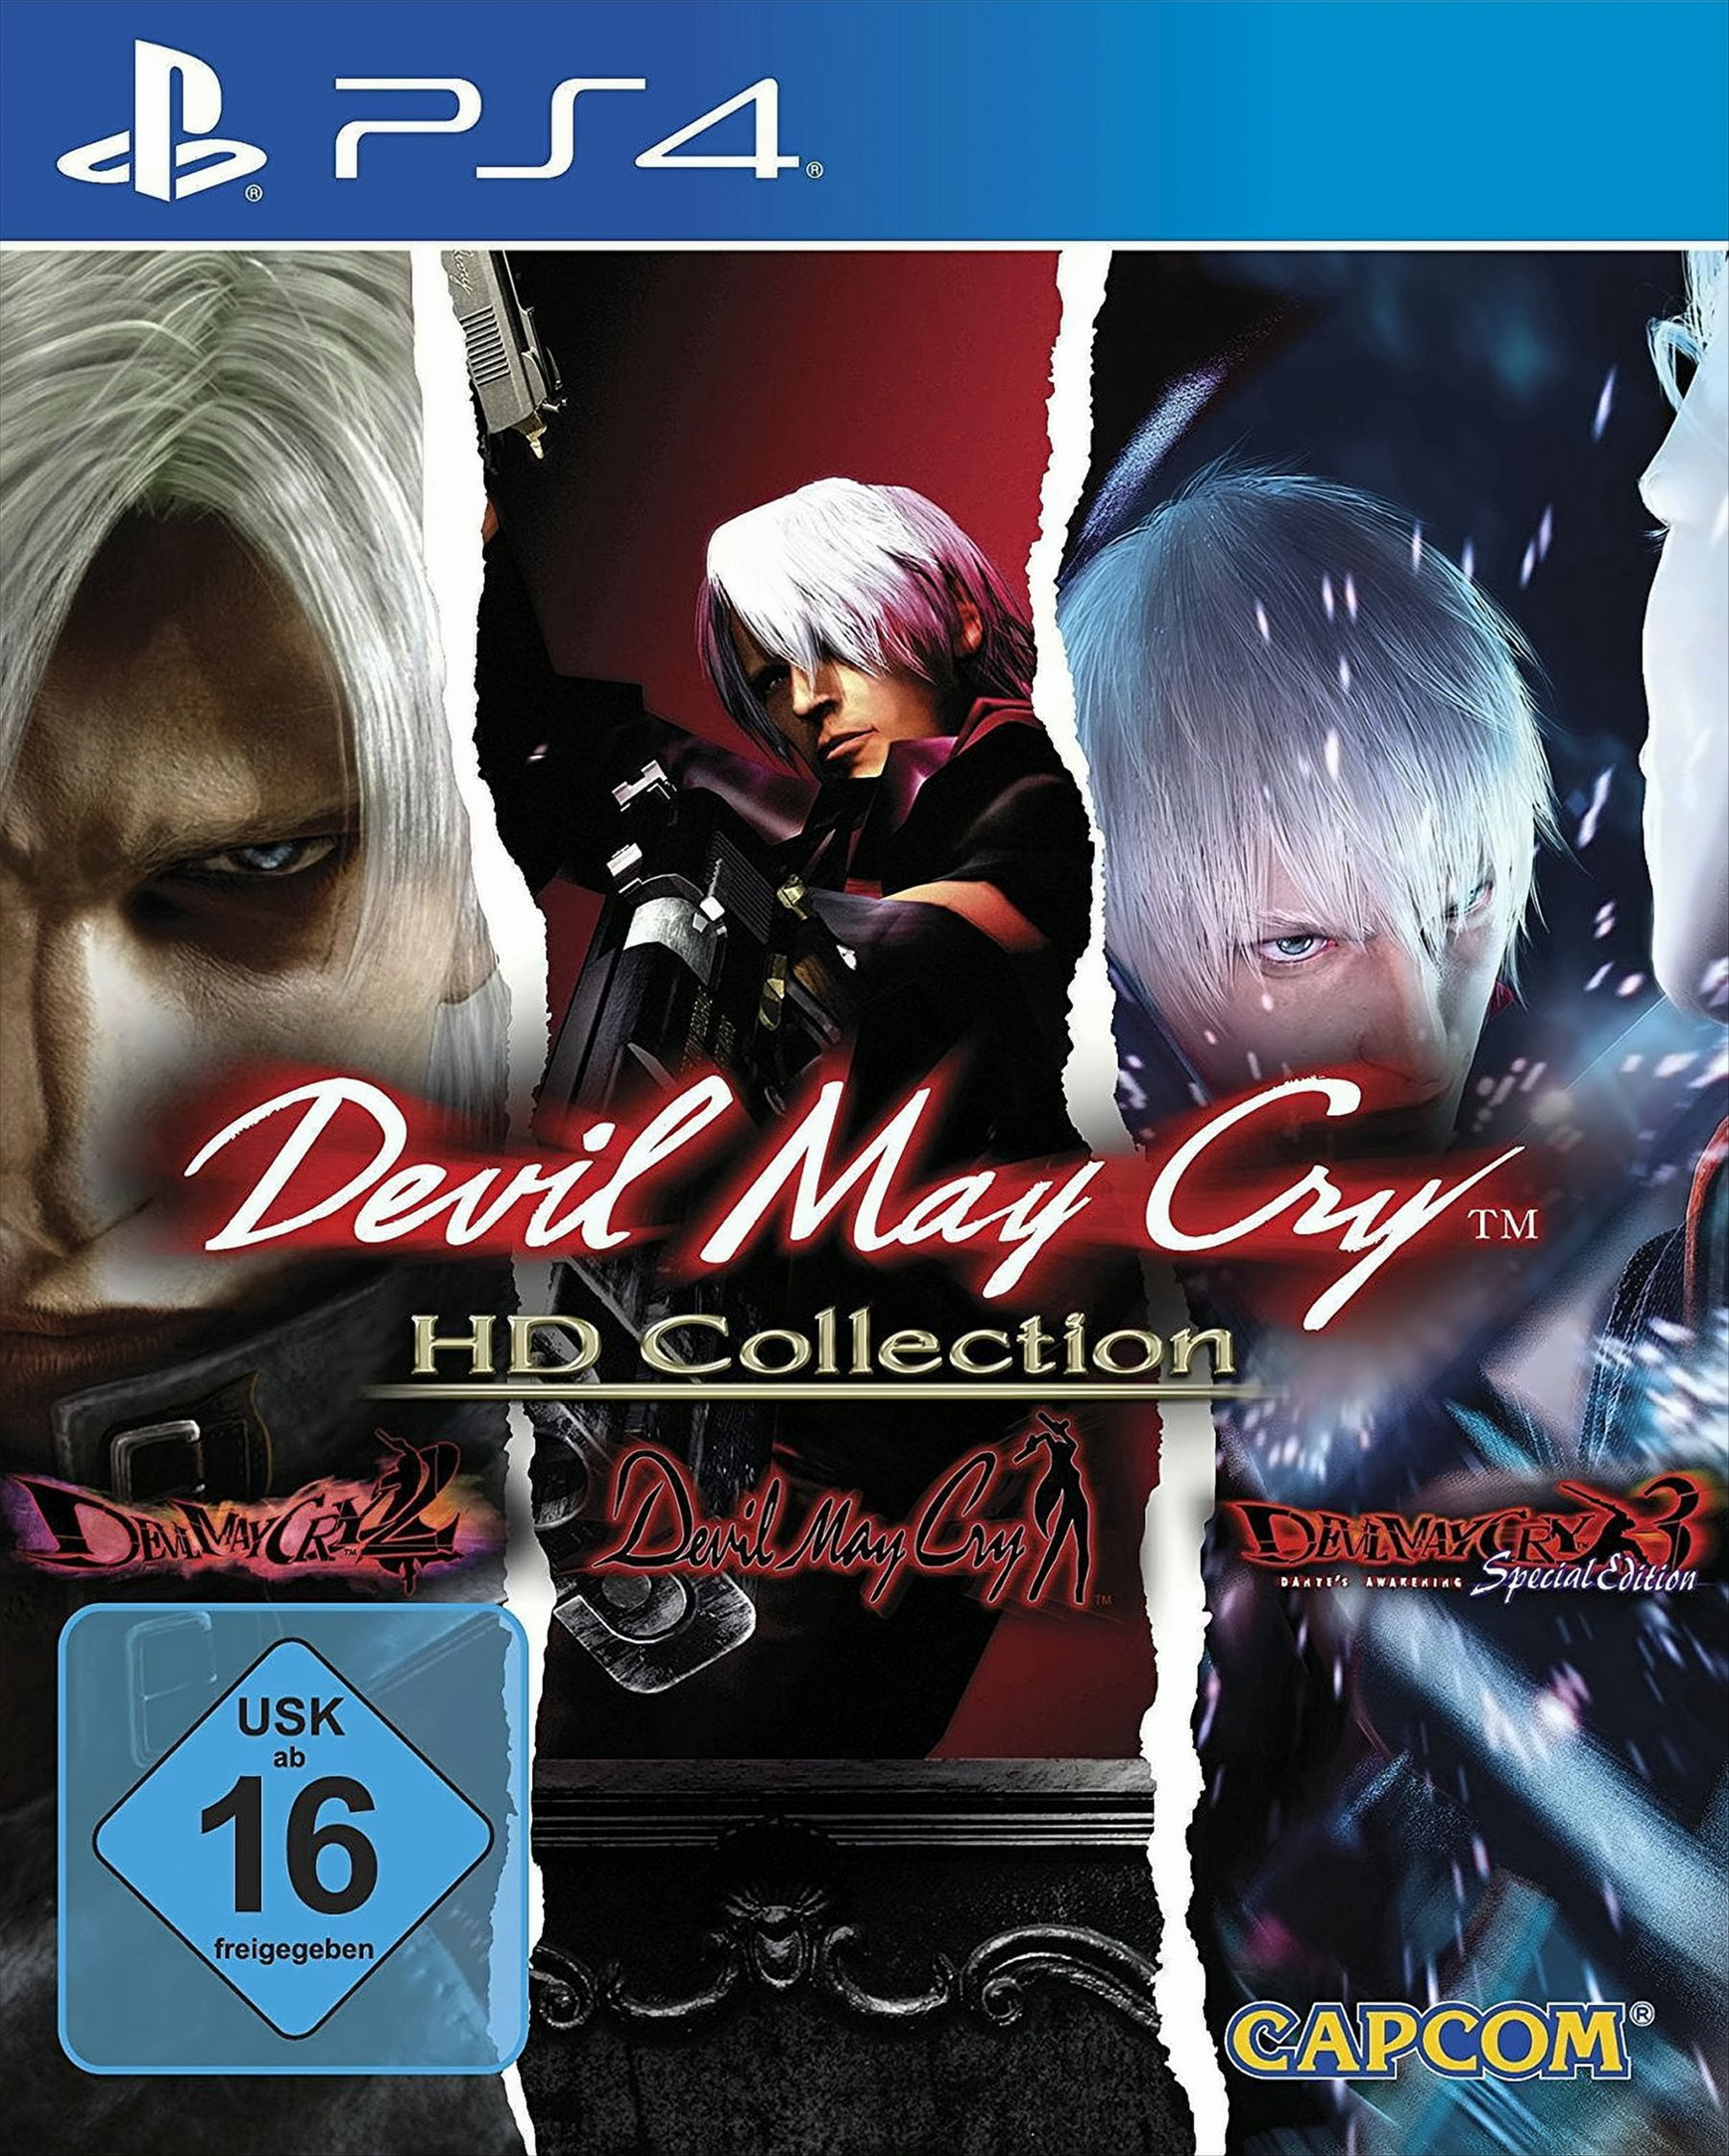 May Cry HD 4] - [PlayStation Collection Devil